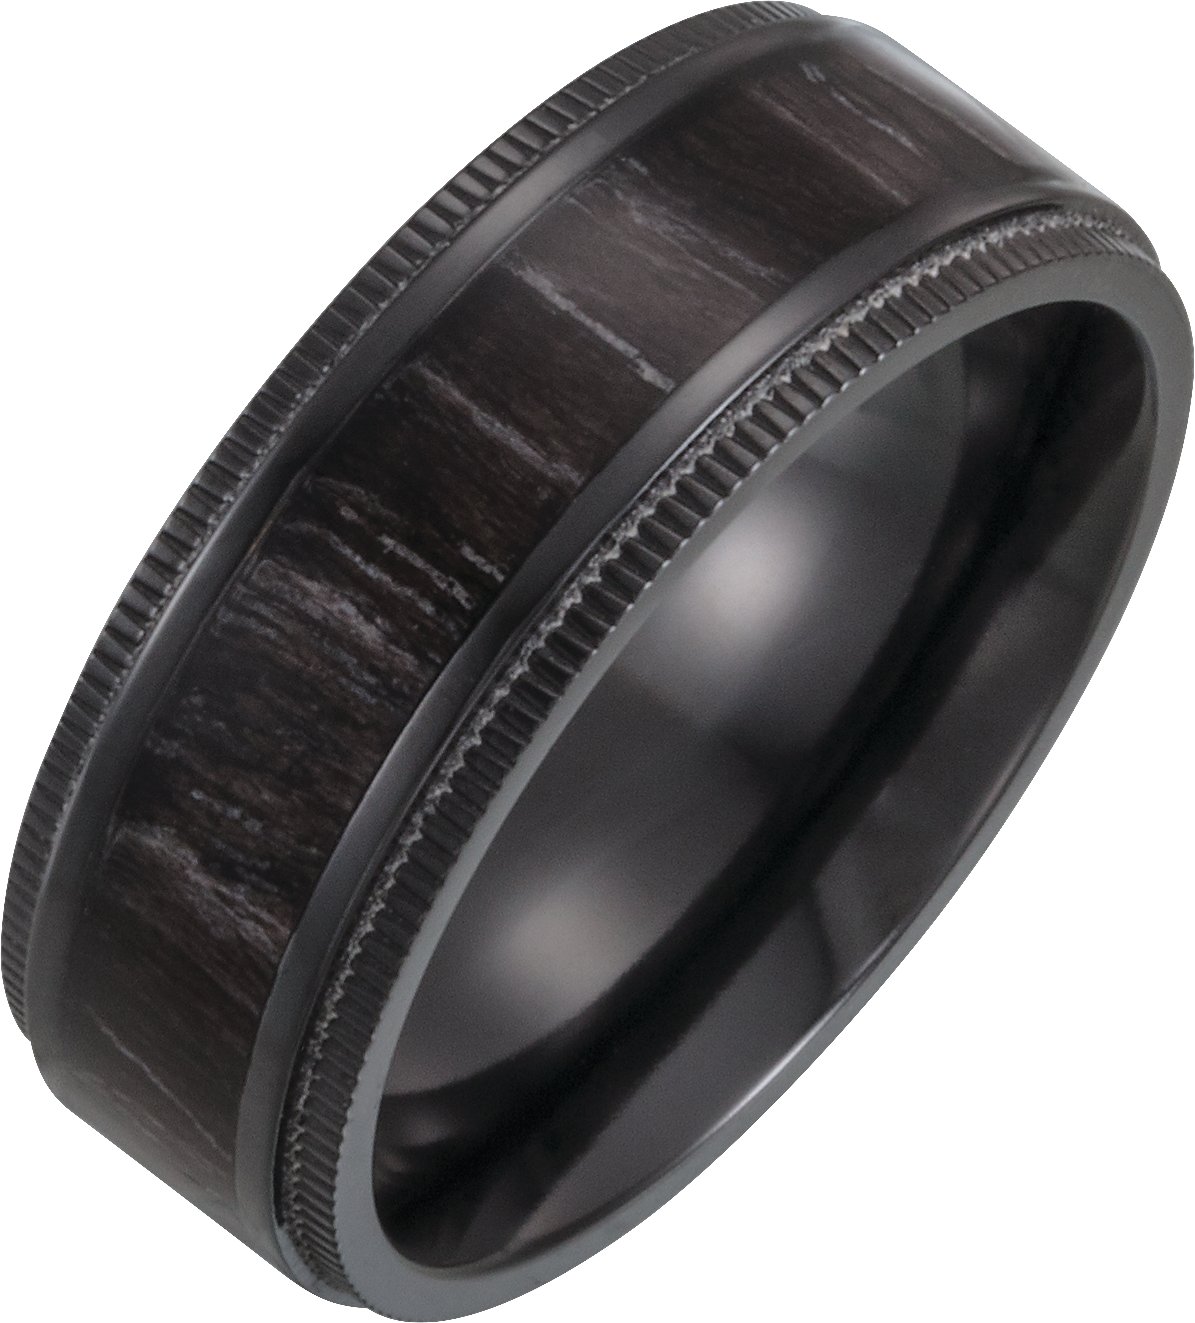 Black Titanium 8 mm Coin-Edge Band with Wood Inlay Size 8.5